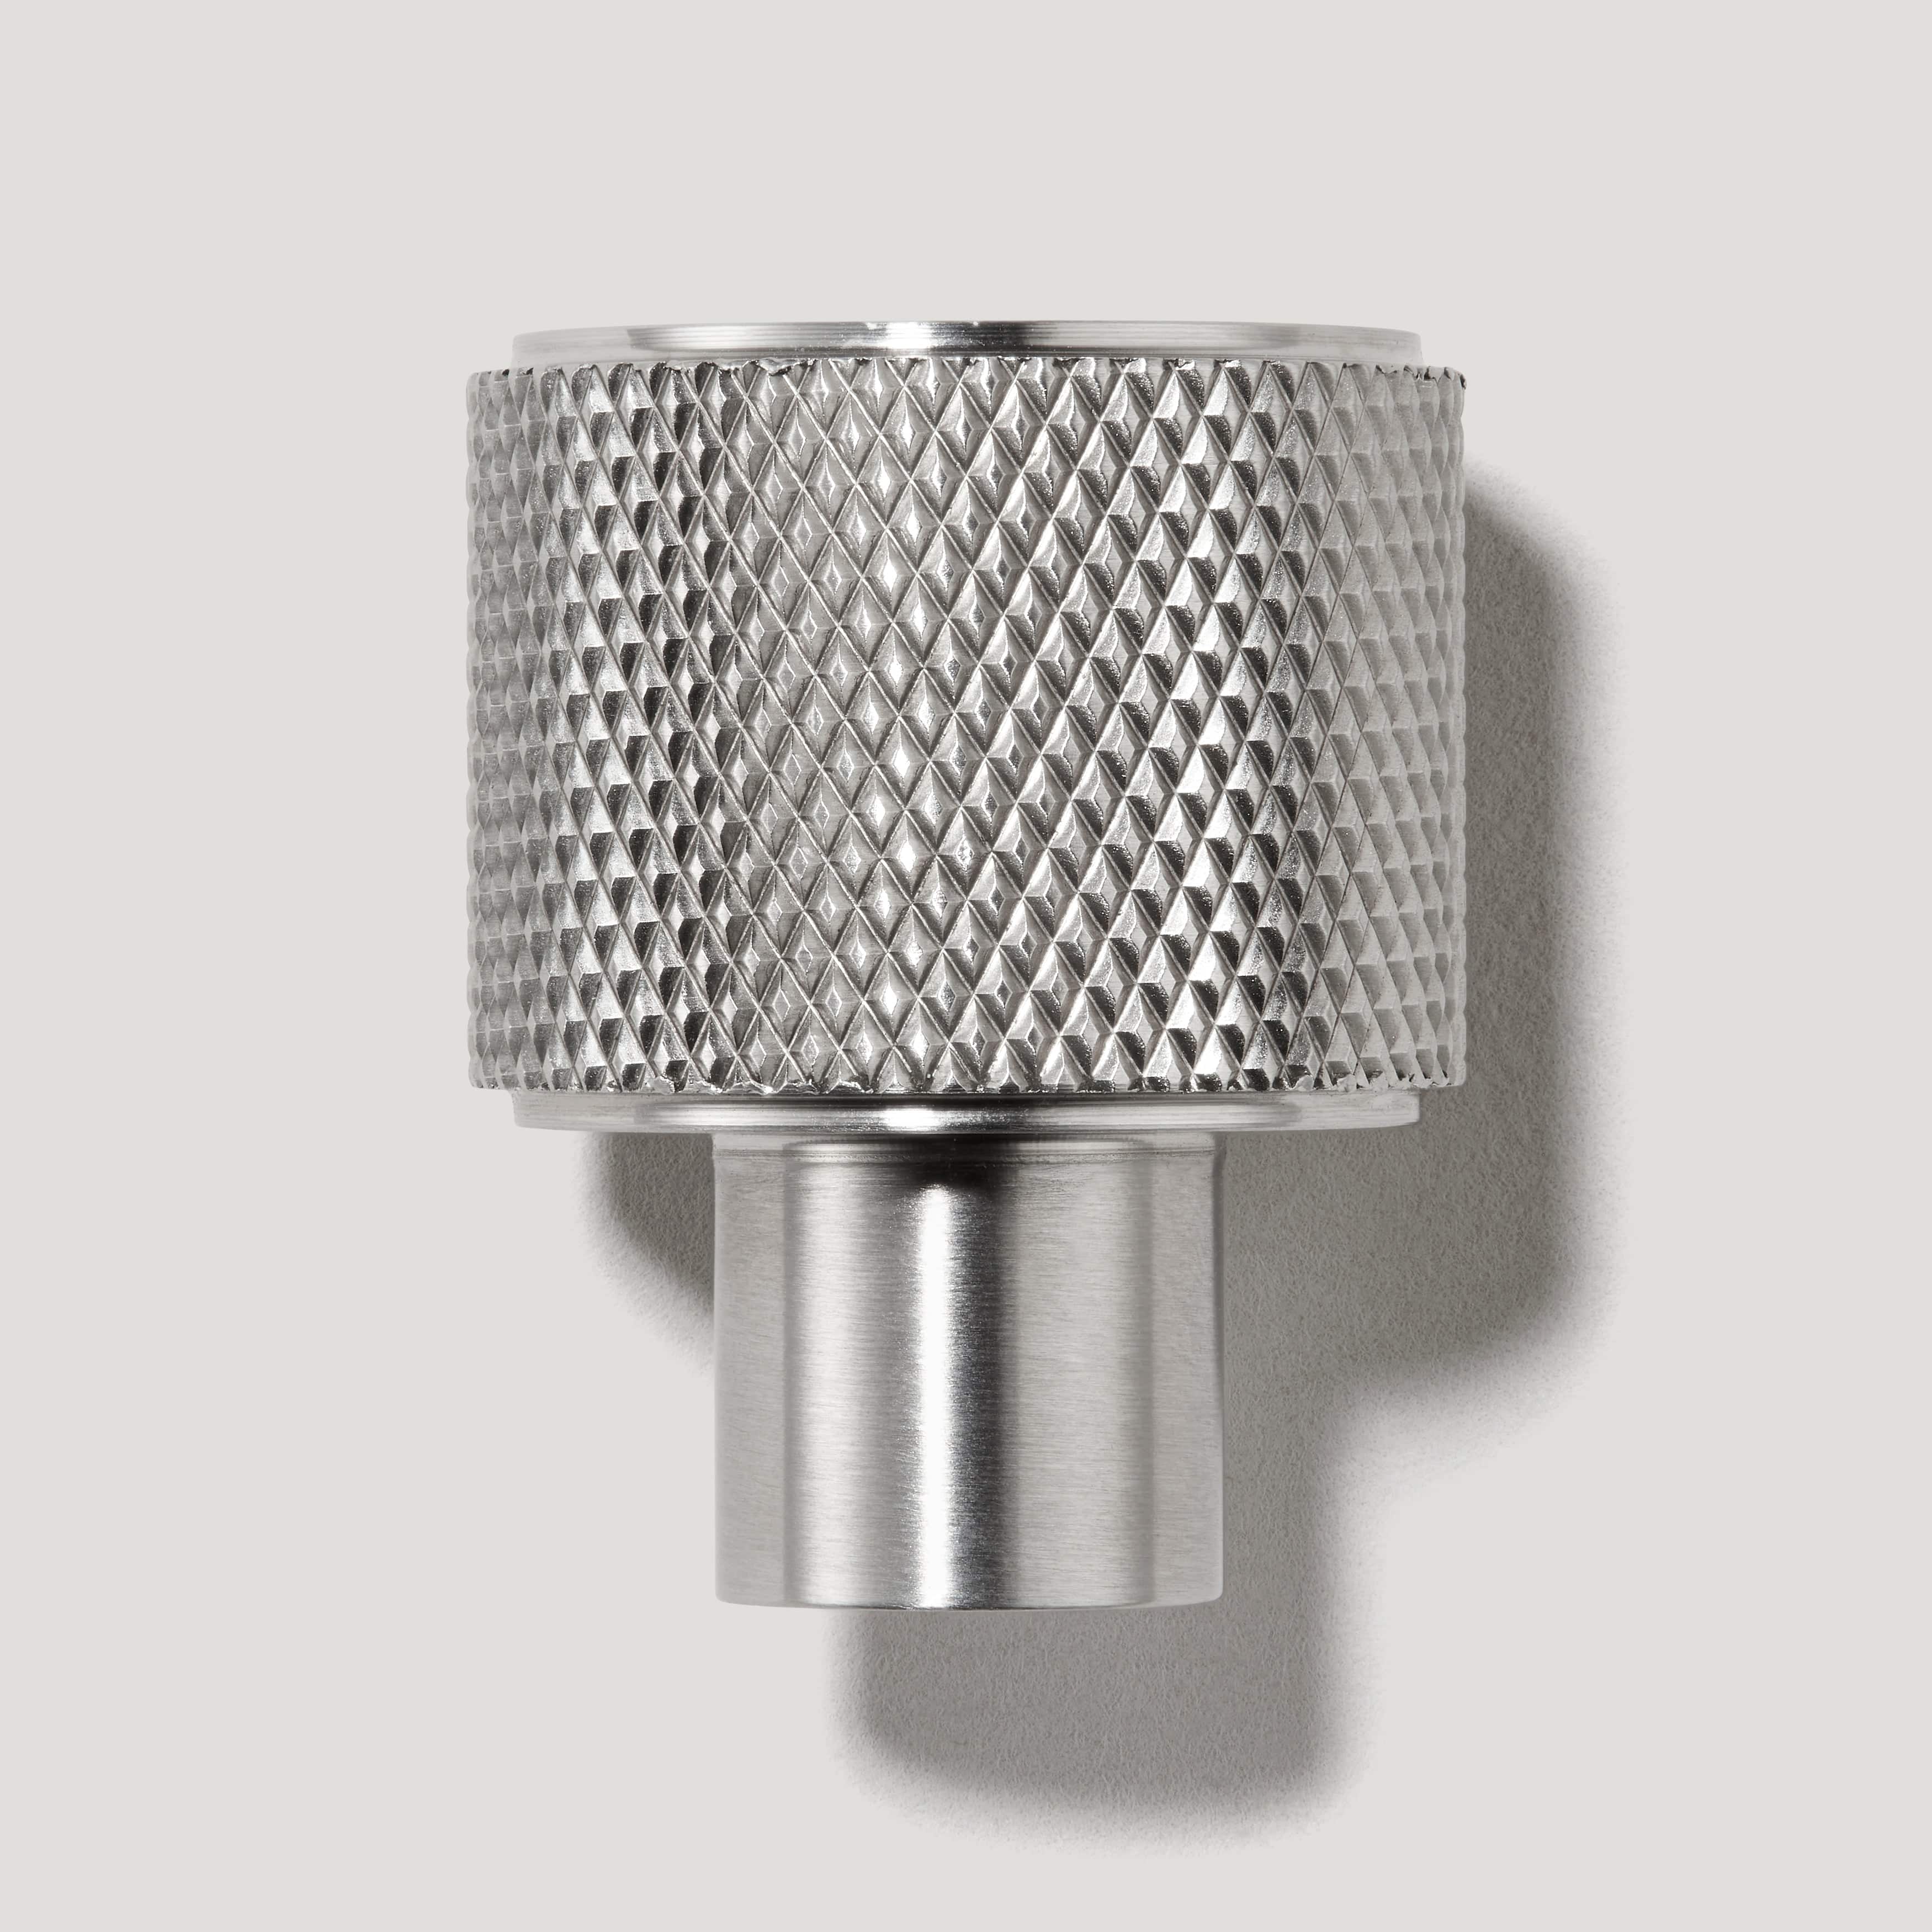 Plank Hardware Handles & Knobs REVILL Knurled Button Knob - Stainless Steel